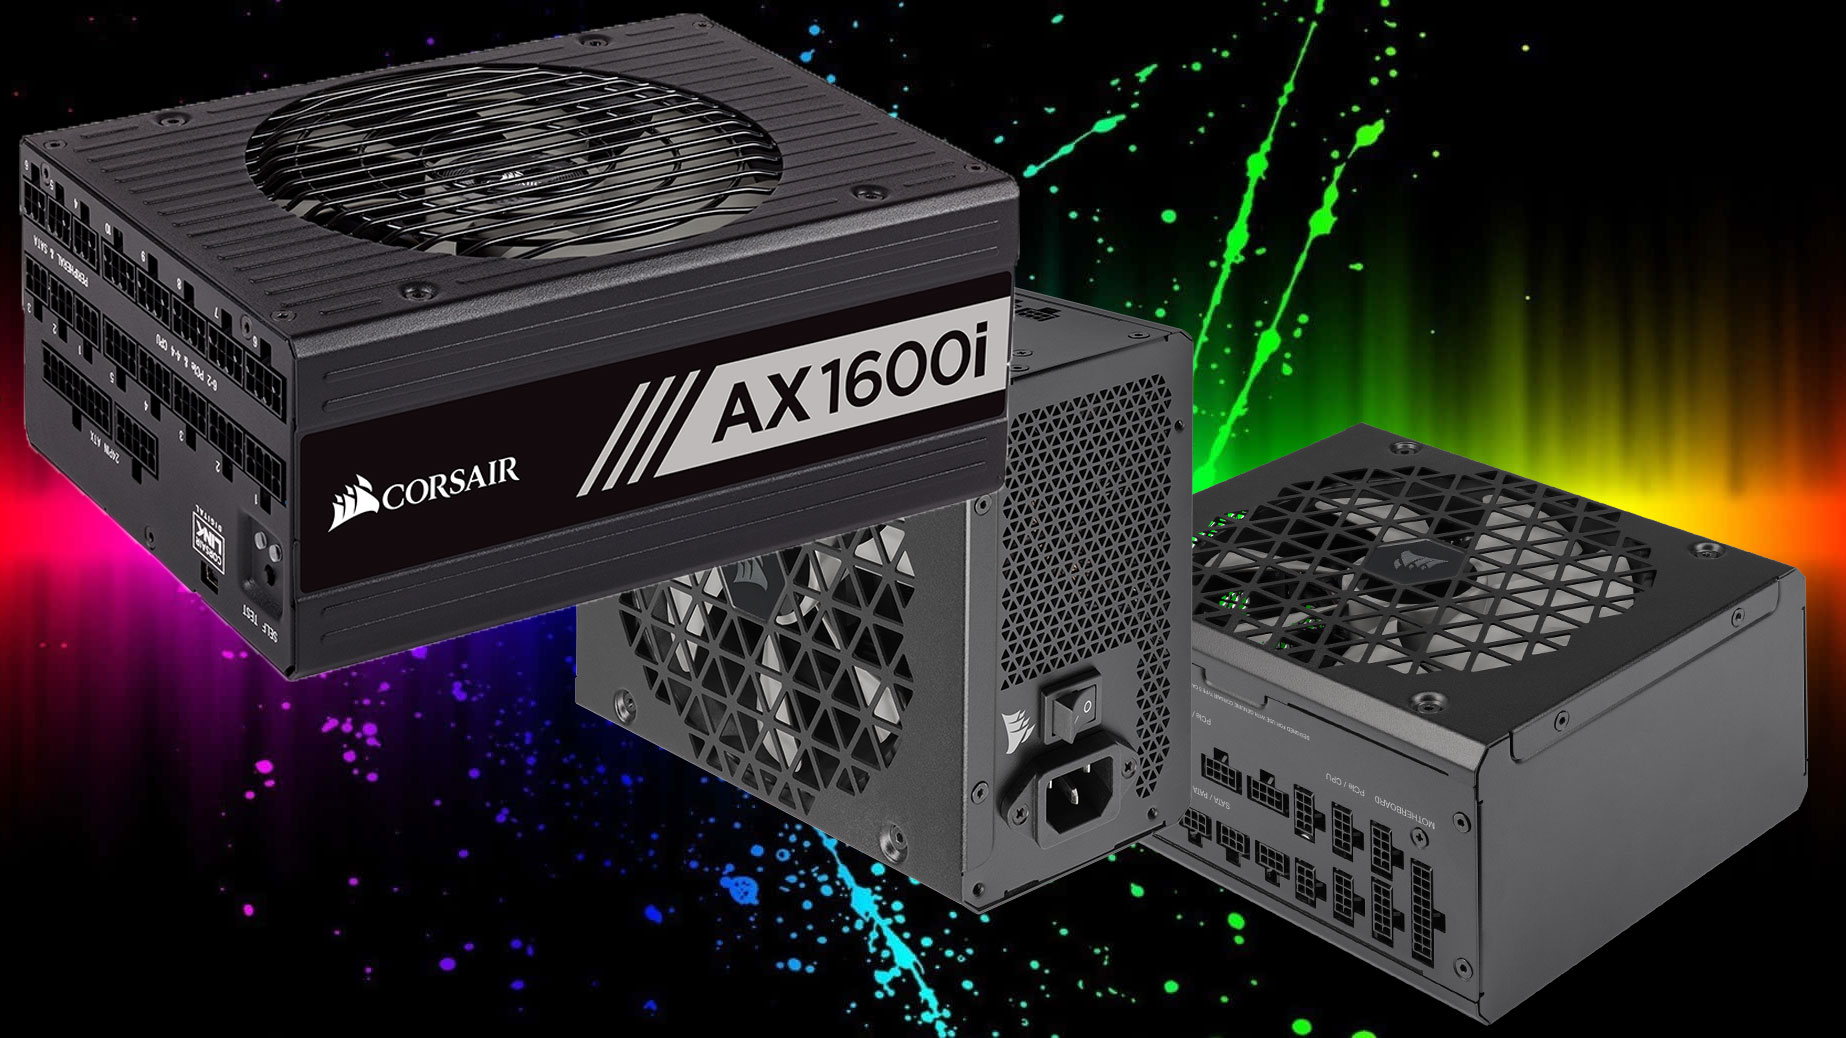 Corsair's range of PSUs will power any PC build, big and small